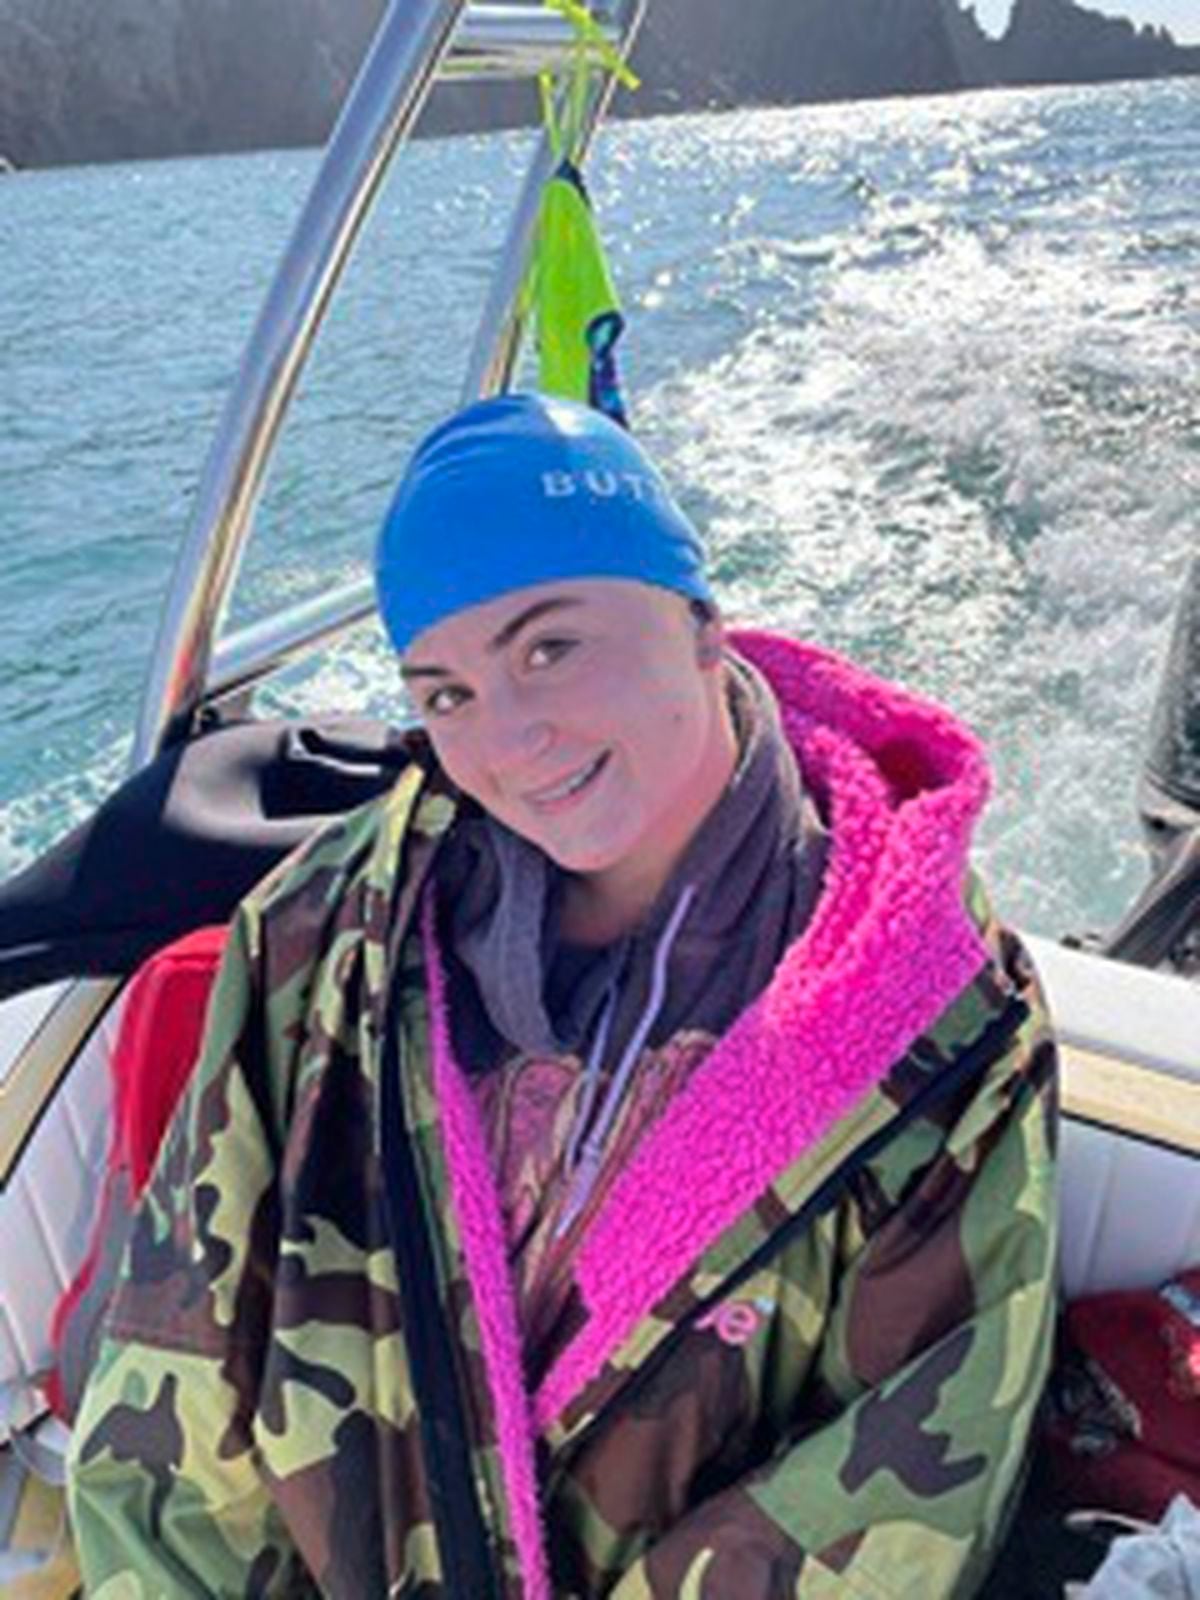 Delphine Riley set records as the youngest and fastest person to swim from Guernsey to Alderney while not wearing a wetsuit.